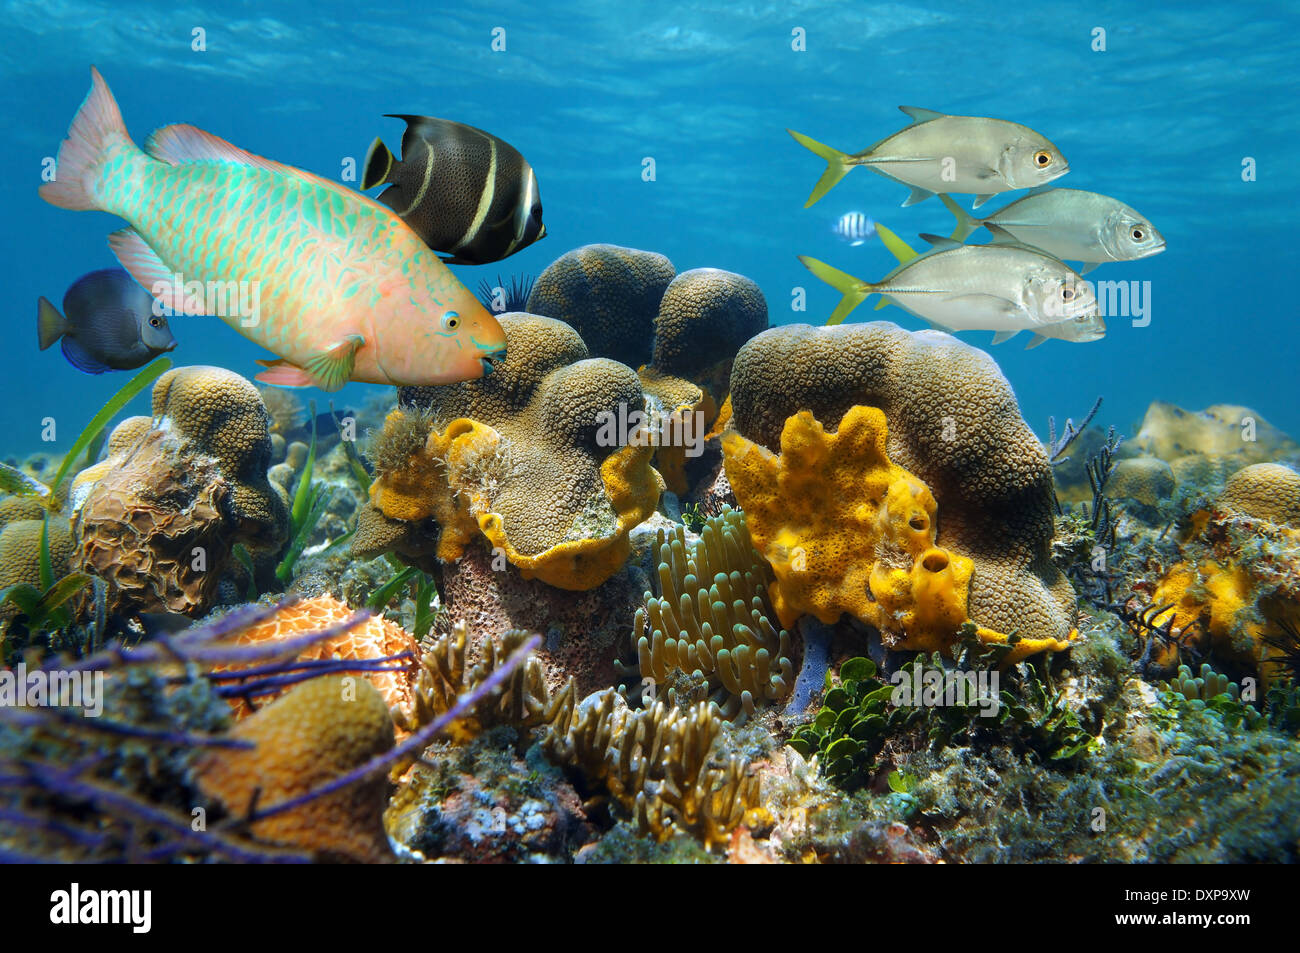 Underwater scenery with tropical fish in a coral reef, Caribbean sea, Bocas del Toro, Panama Stock Photo